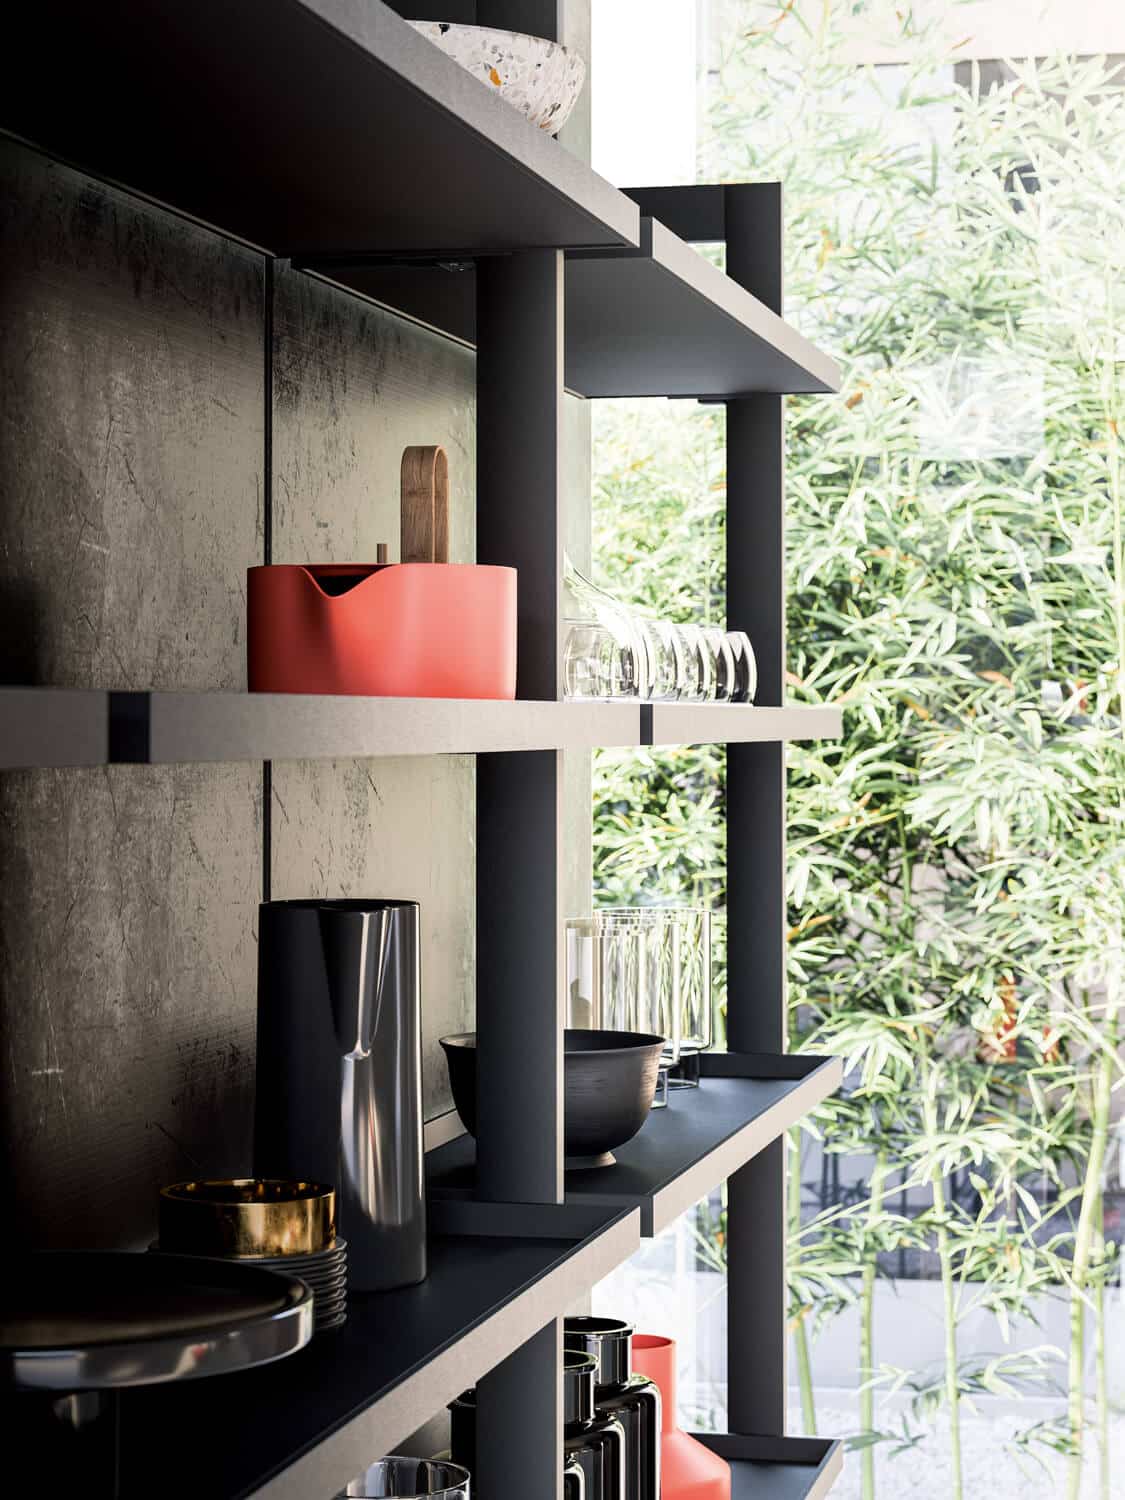 Detail of the Palo open shelving system in Black anodized aluminum. The system can be attached to the wall or built as a free-standing solution.
